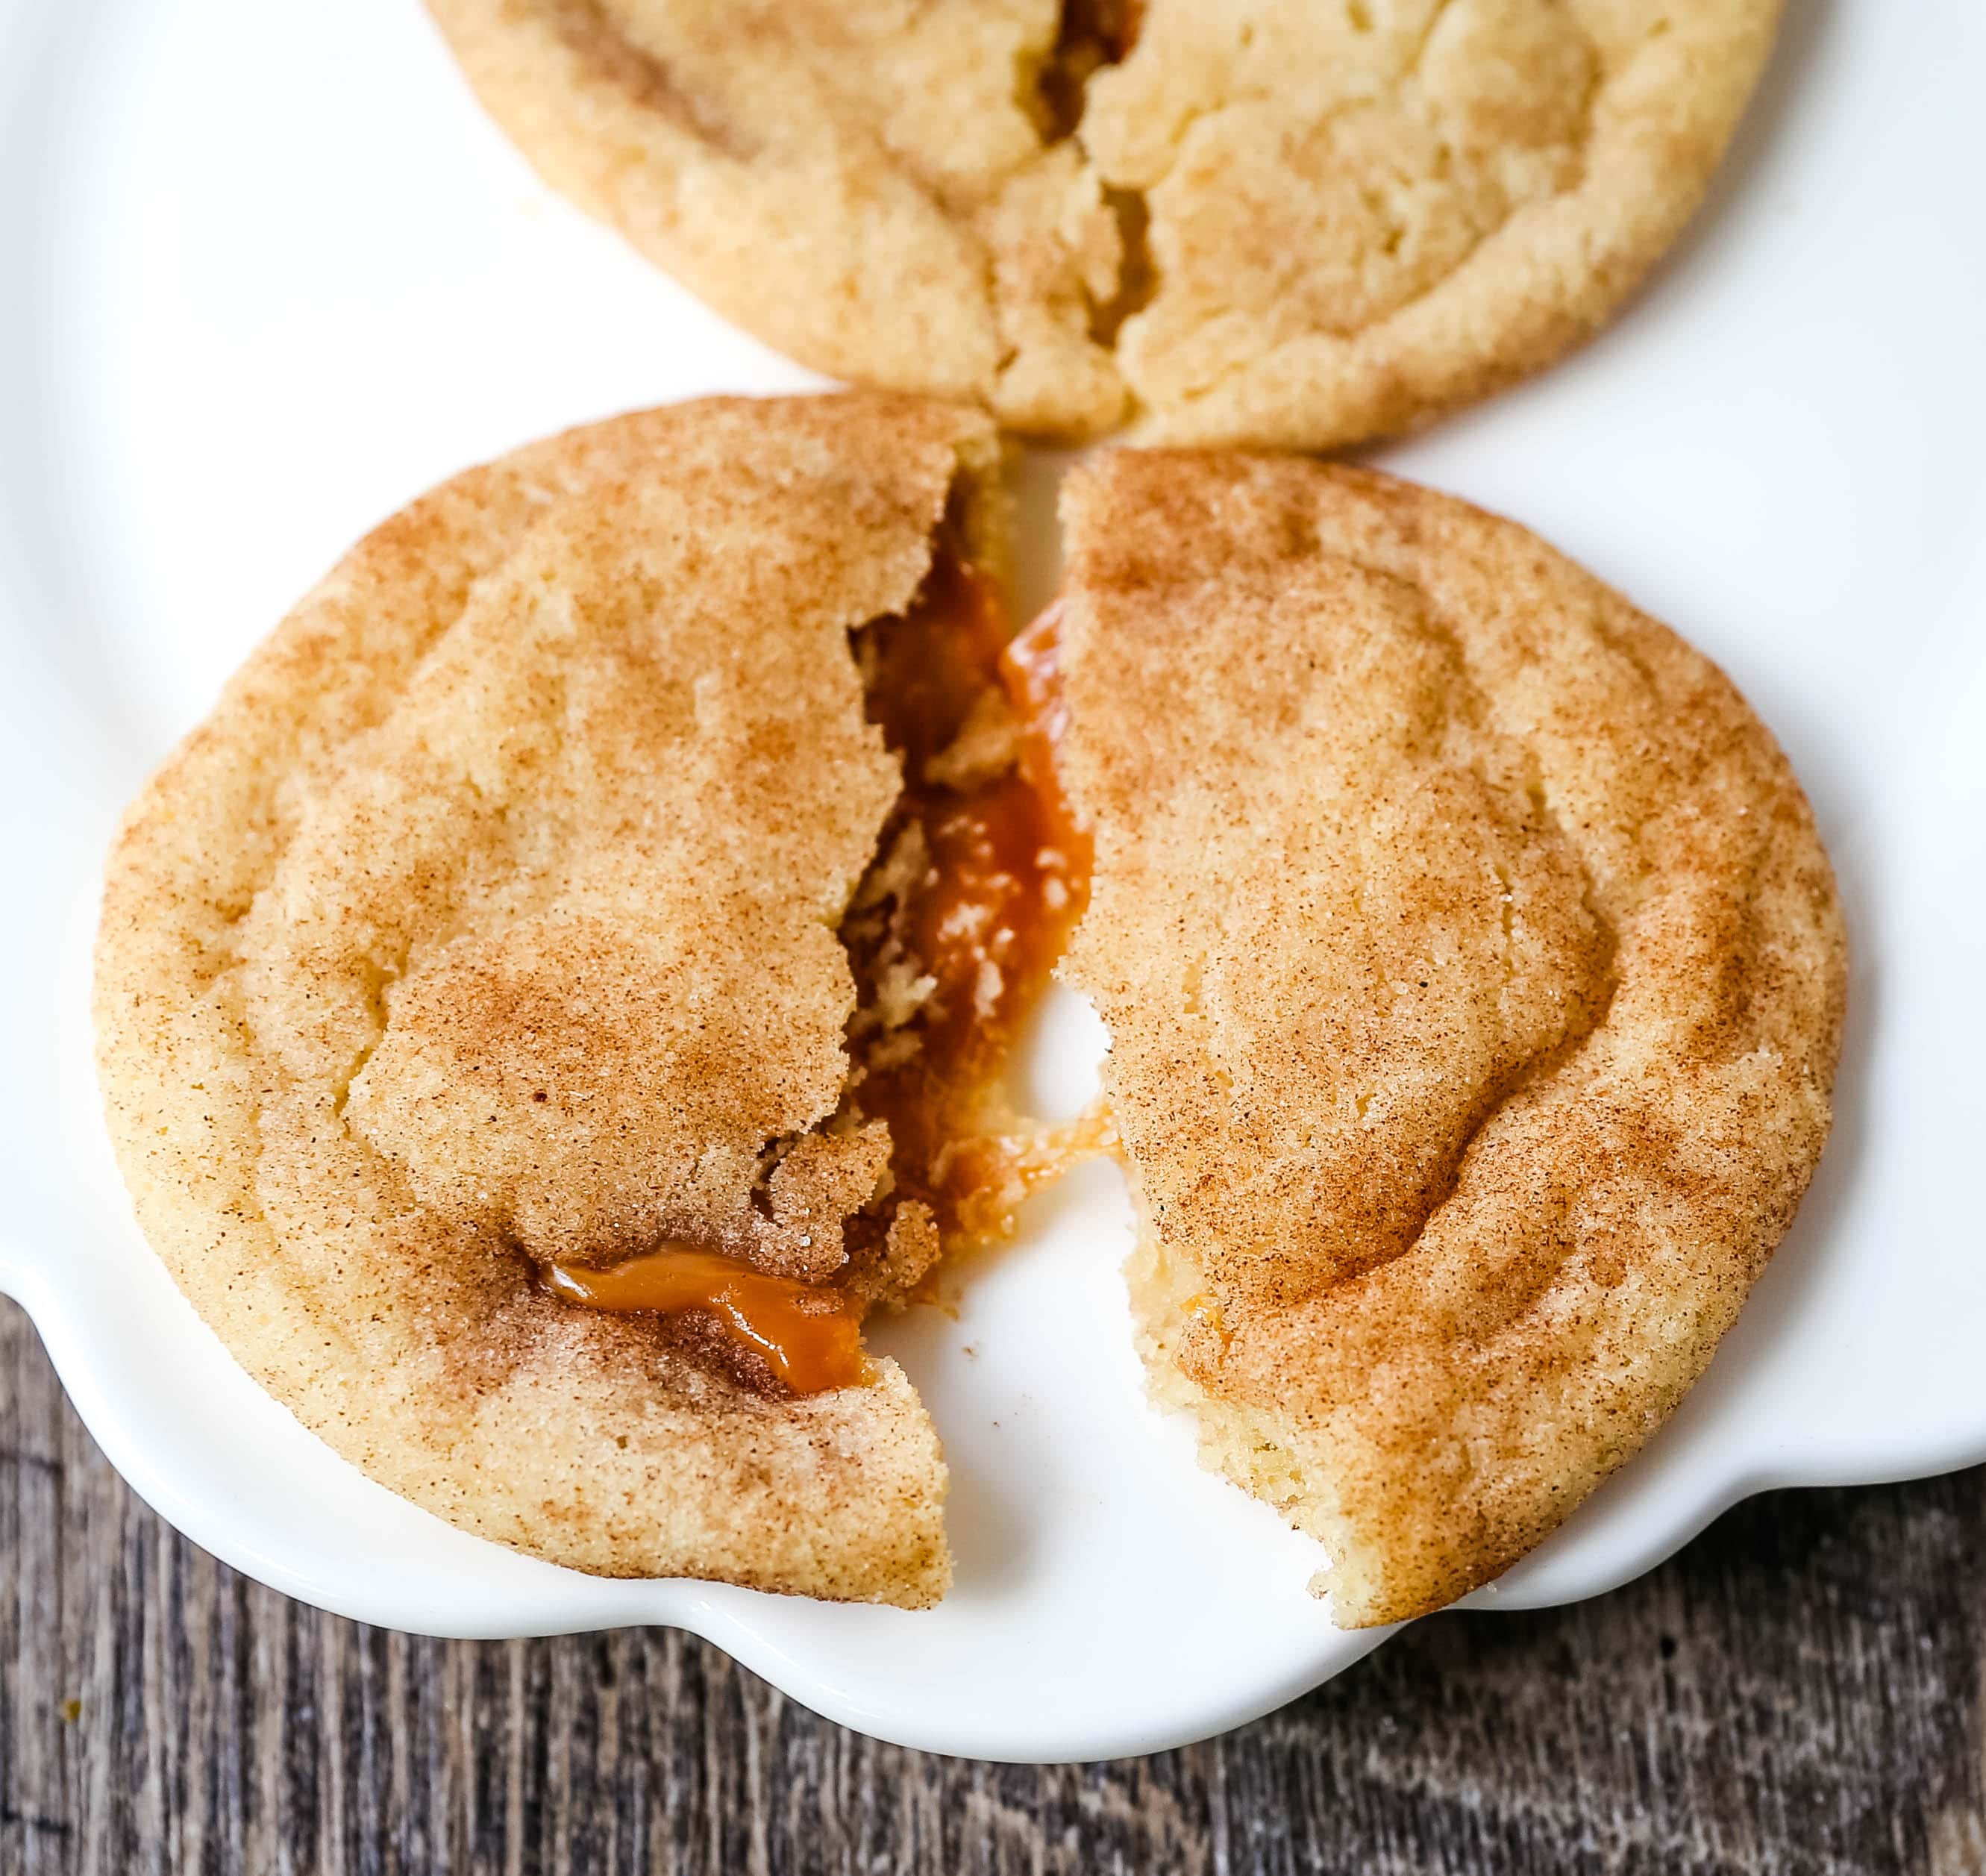 Caramel Filled Snickerdoodle Cookies Soft chewy cinnamon sugar snickerdoodle cookies stuffed with buttery caramel. The perfect caramel stuffed snickerdoodle cookie recipe! www.modernhoney.com #caramelsnickerdoodles #christmascookies #cookie #cookies